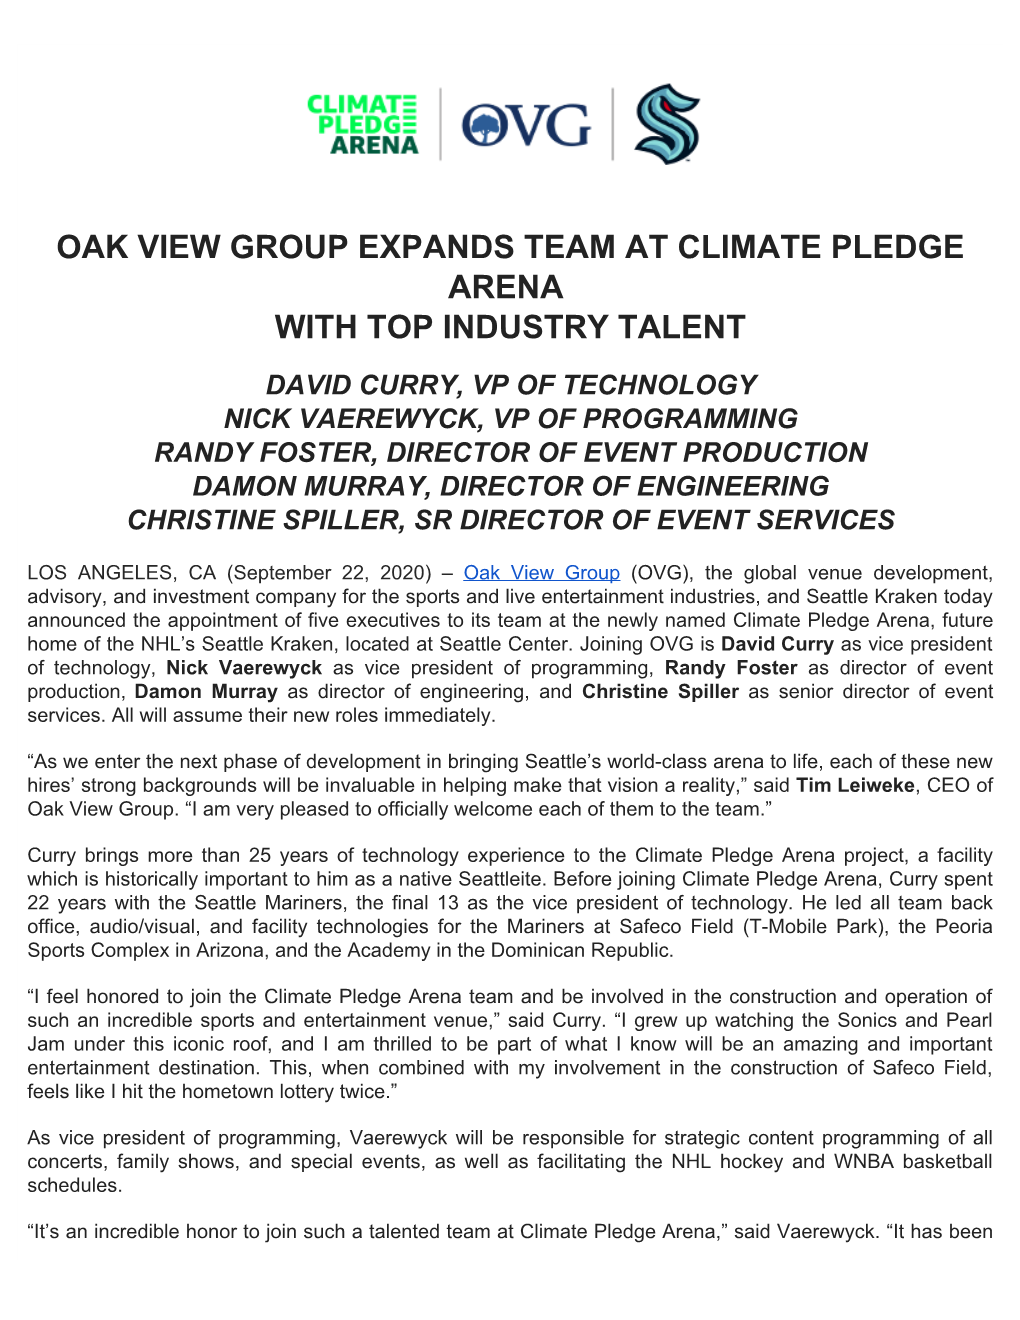 Oak View Group Expands Team at Seattle's Climate Pledge Arena